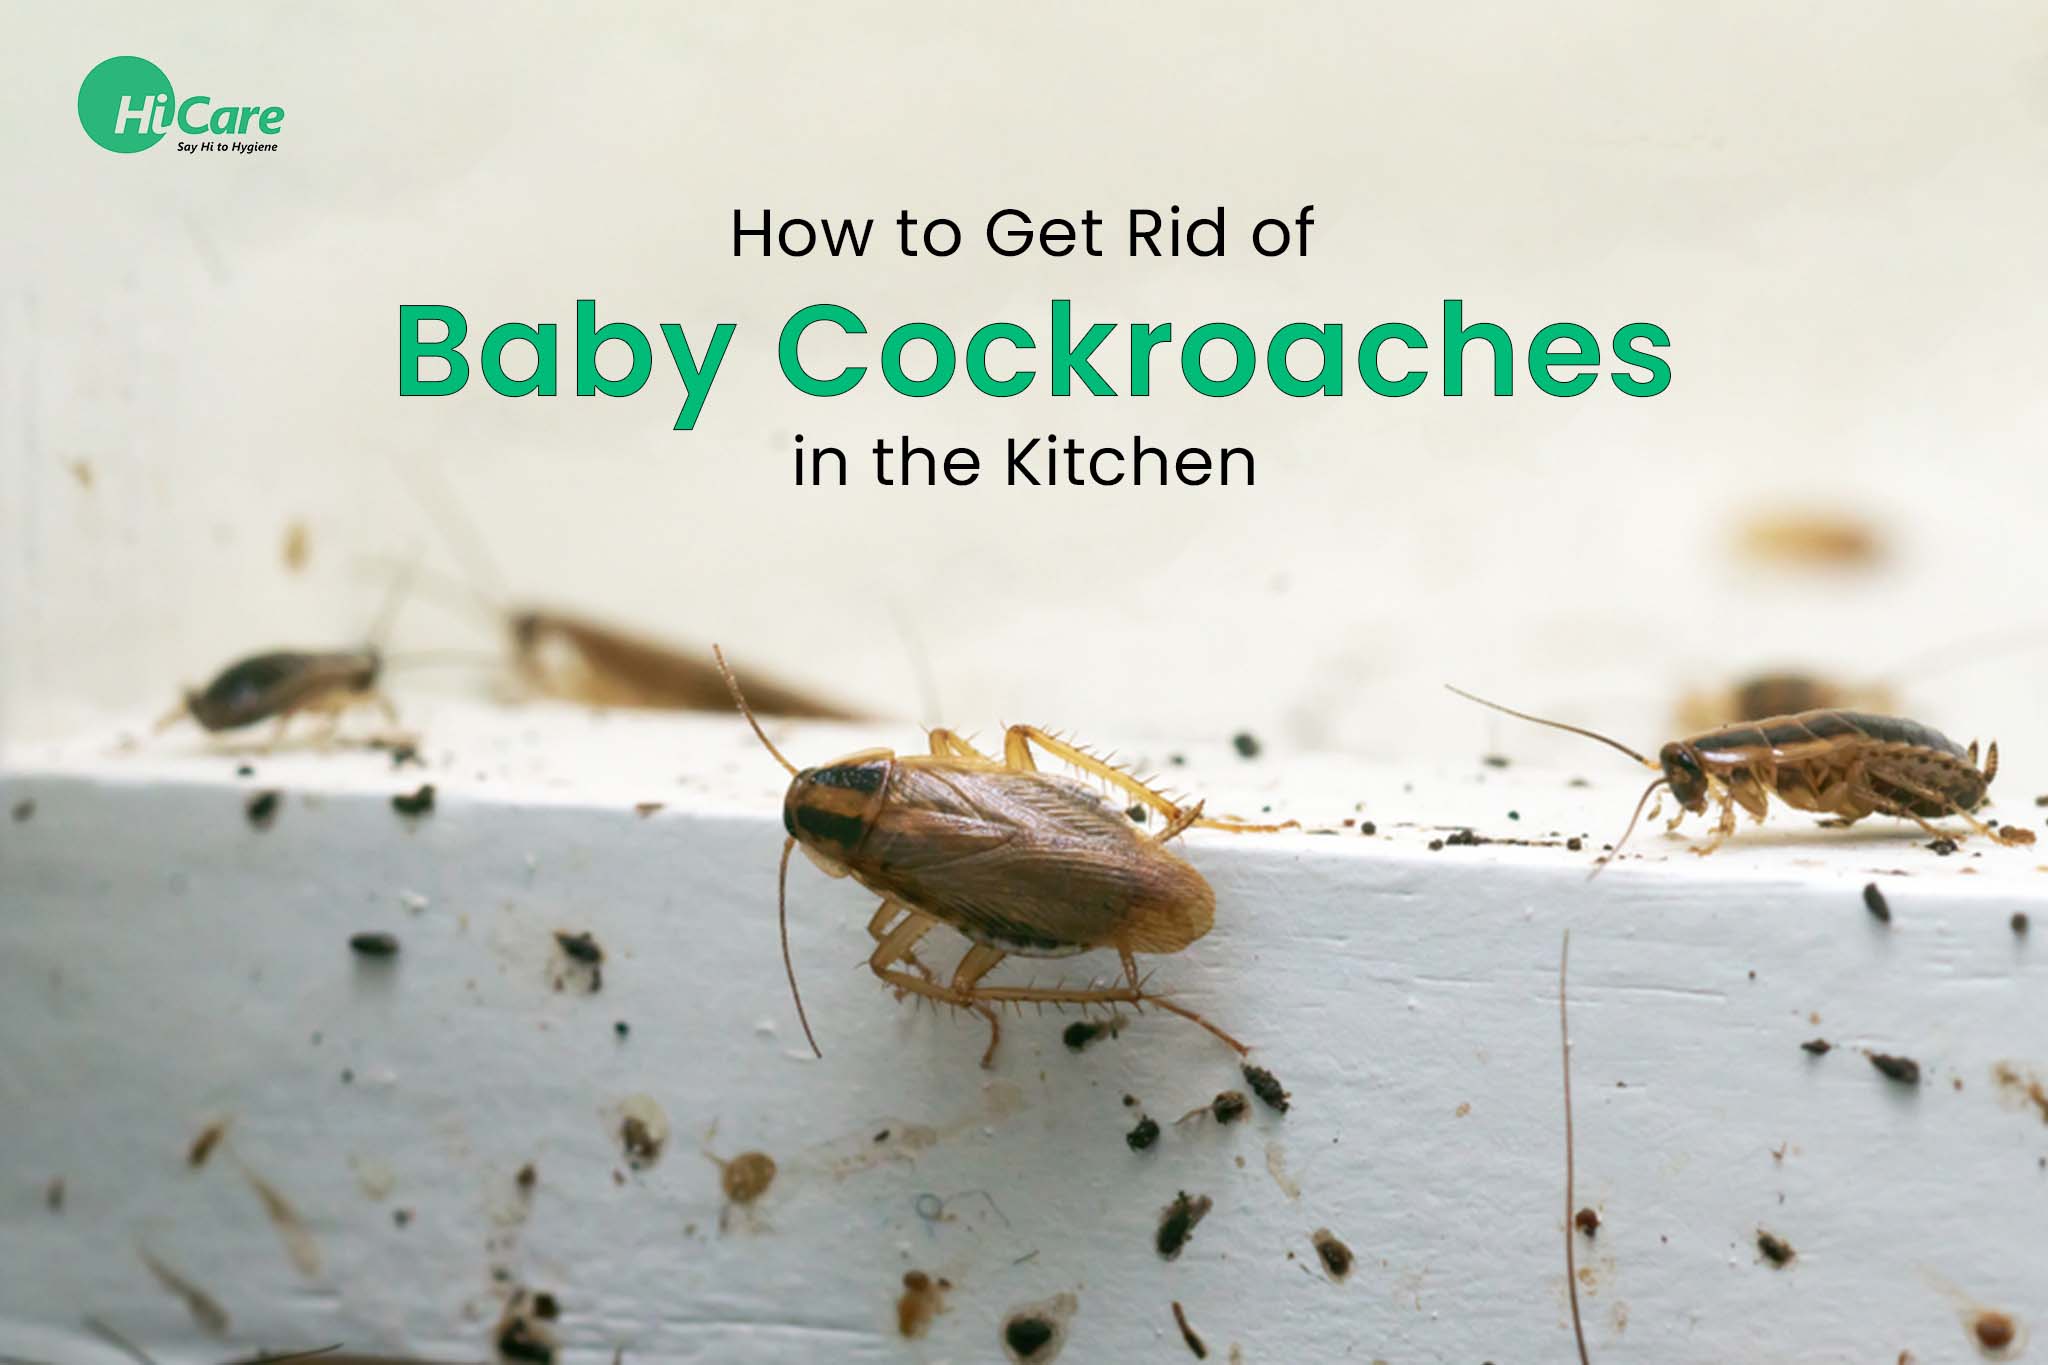 How to Get Rid of Baby Cockroaches in the Kitchen?